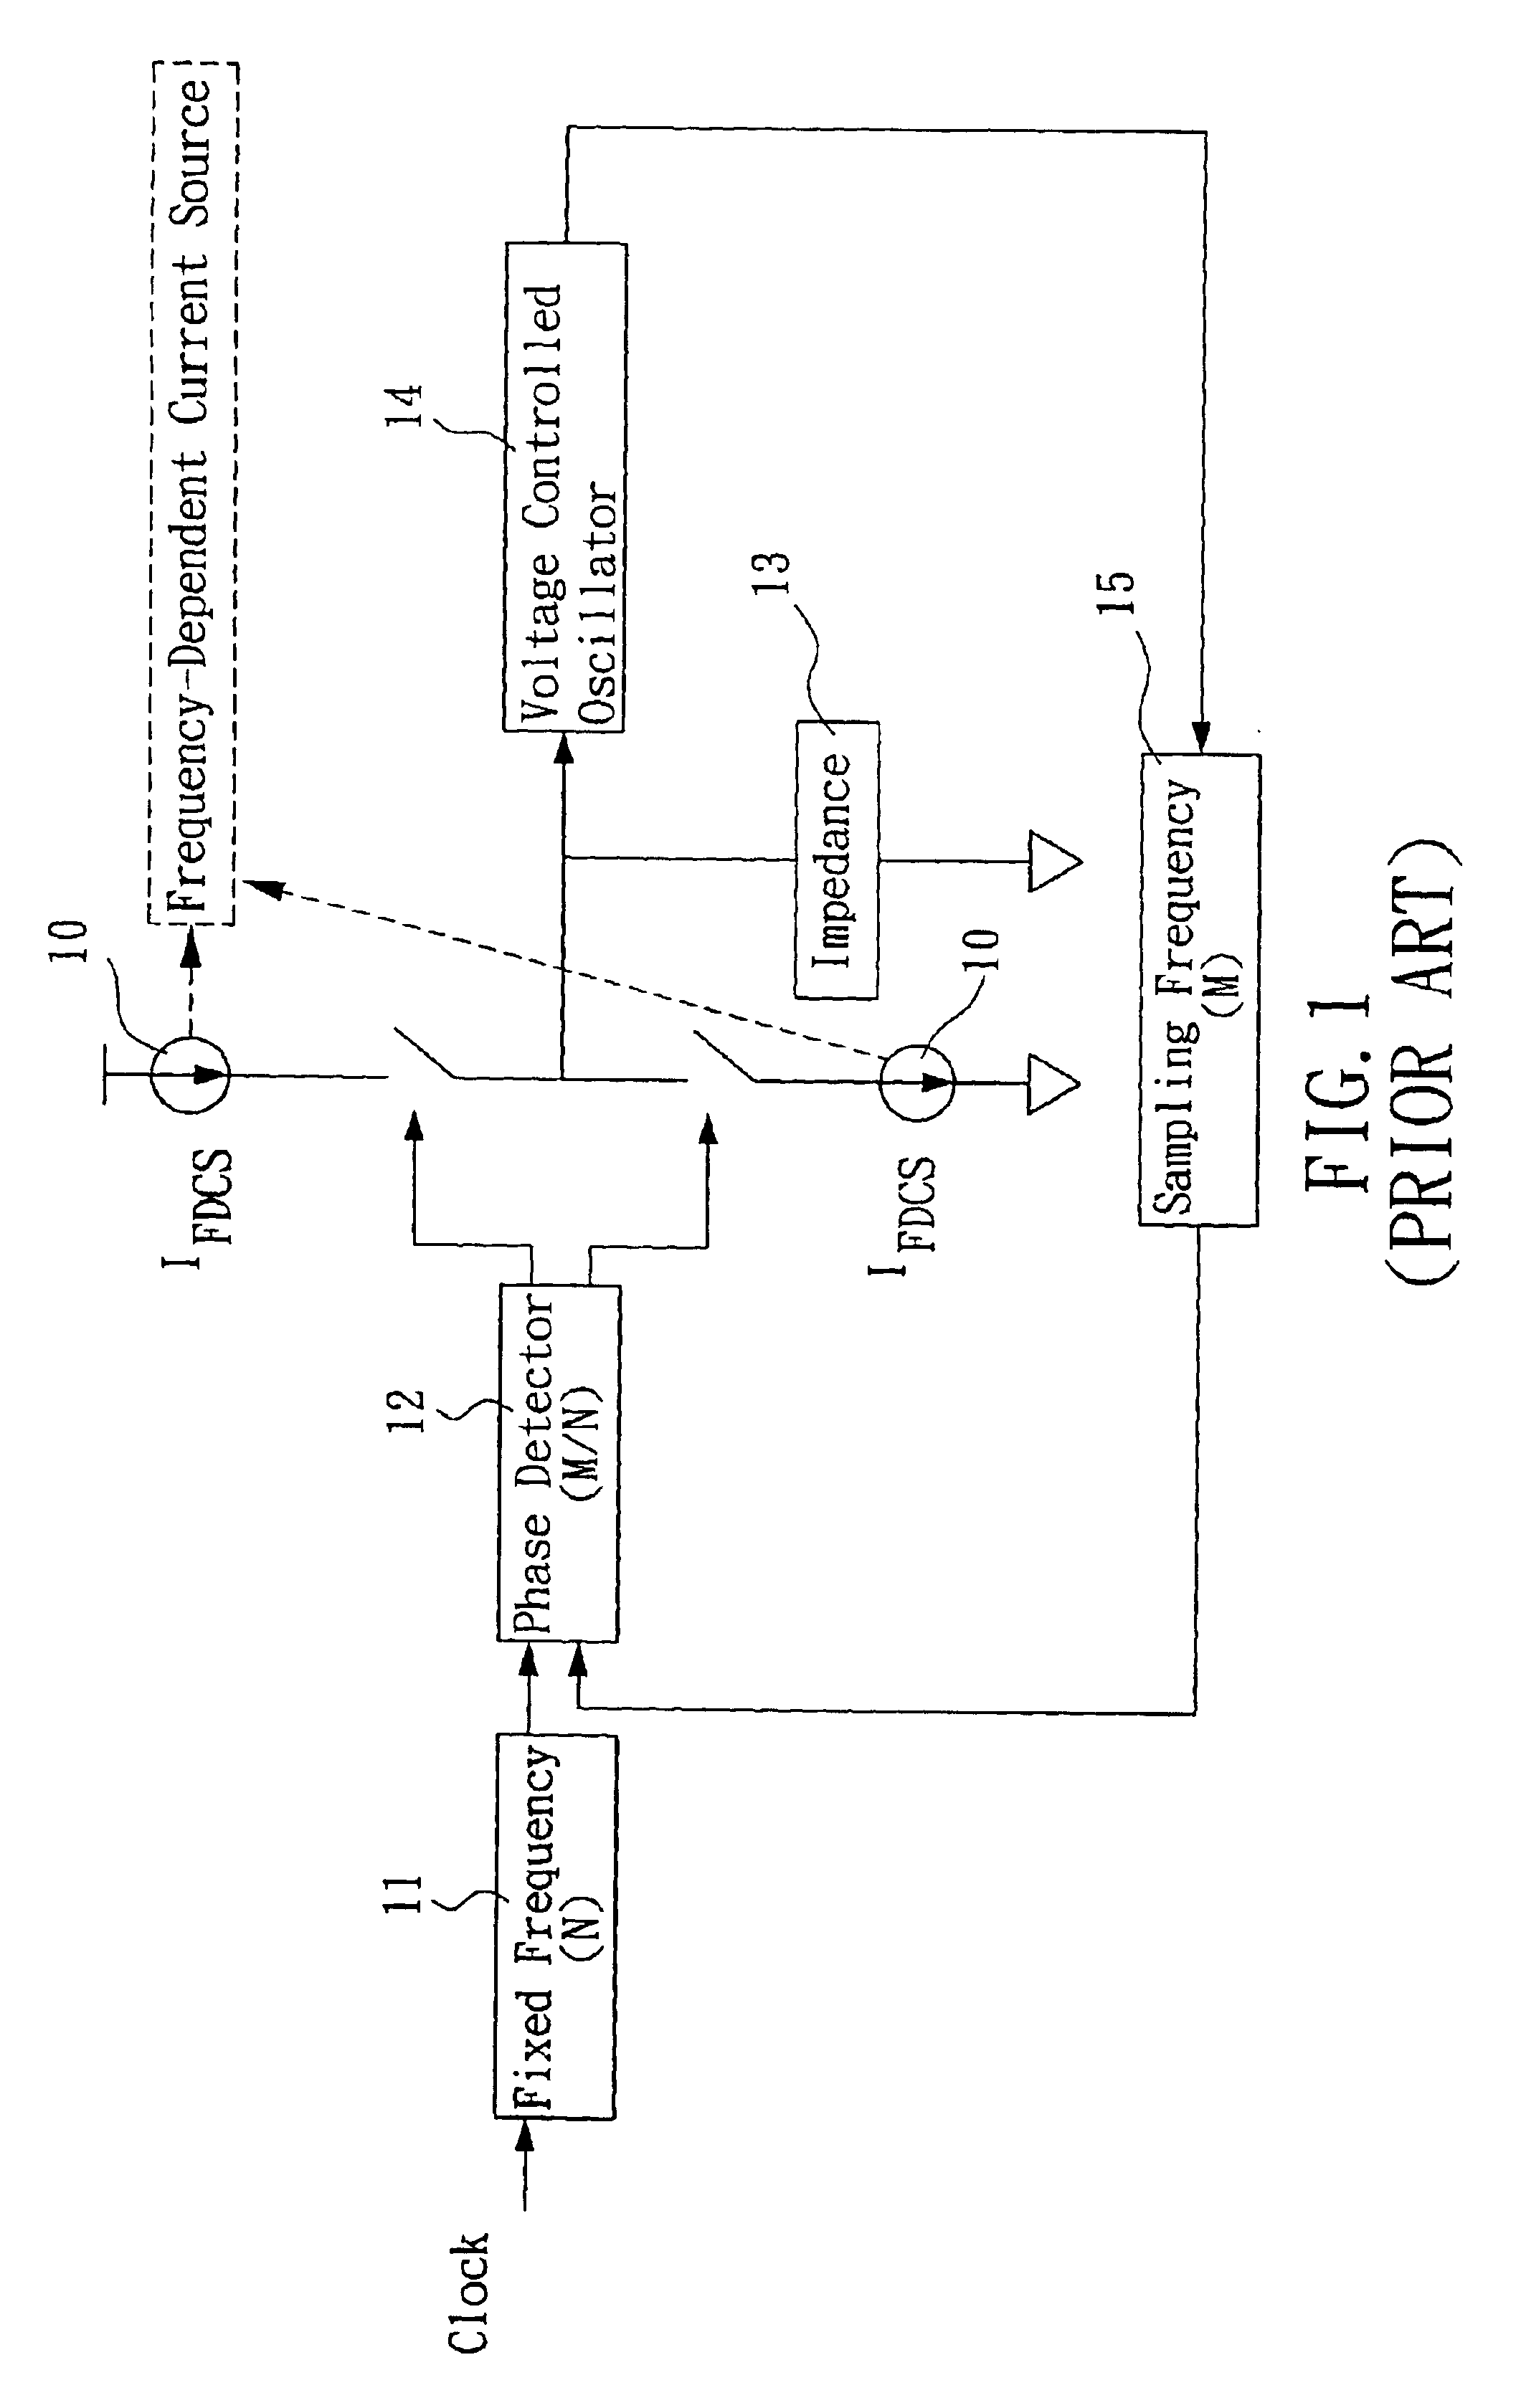 Fast frequency locking method and architecture realized by employing adaptive asymmetric charge-pump current mechanism